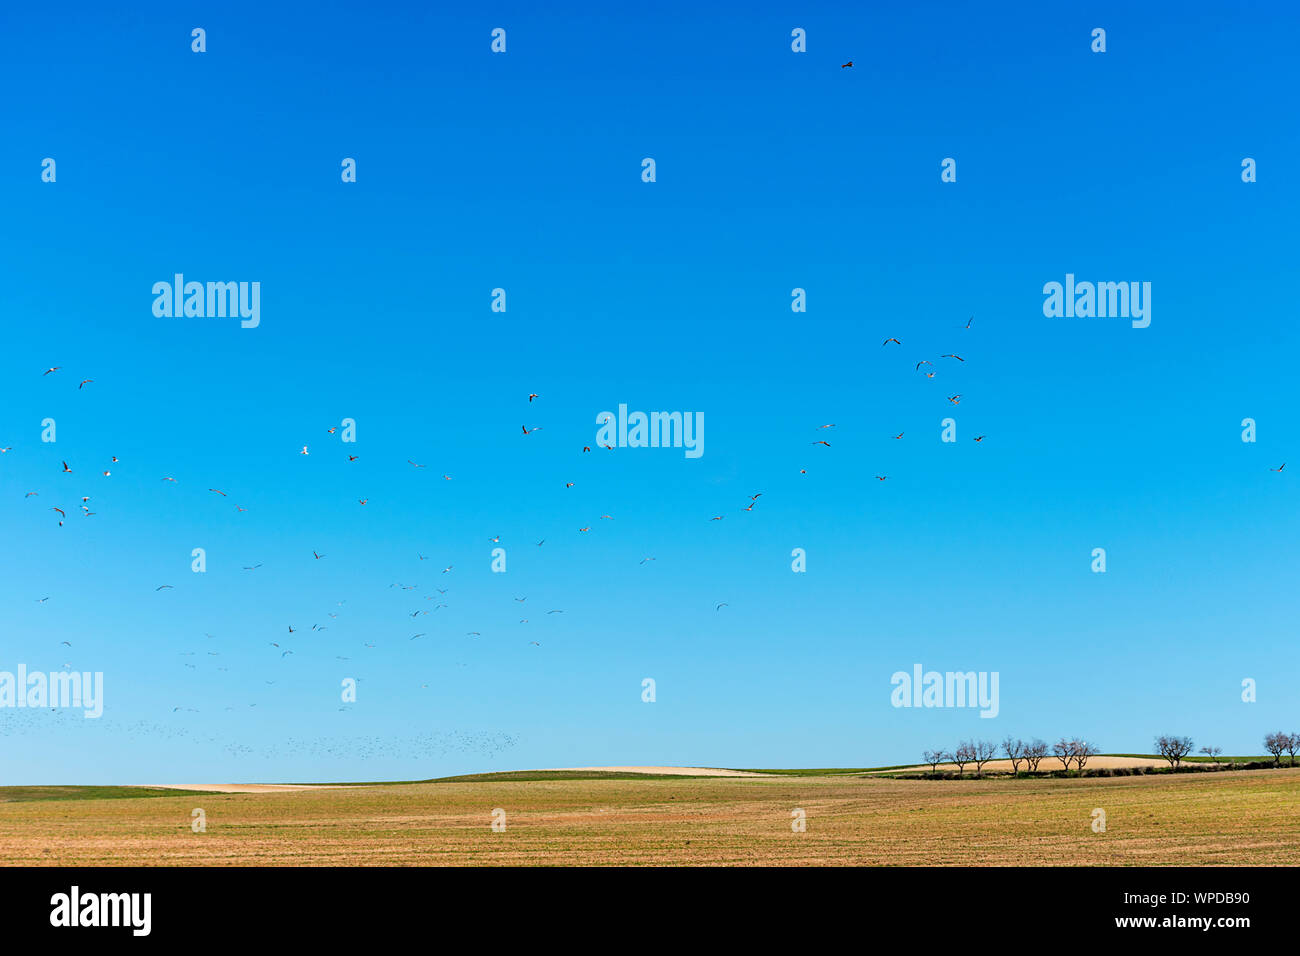 Landscape with trees on the background. Blue sky. Almonds and wild grass. Stock Photo